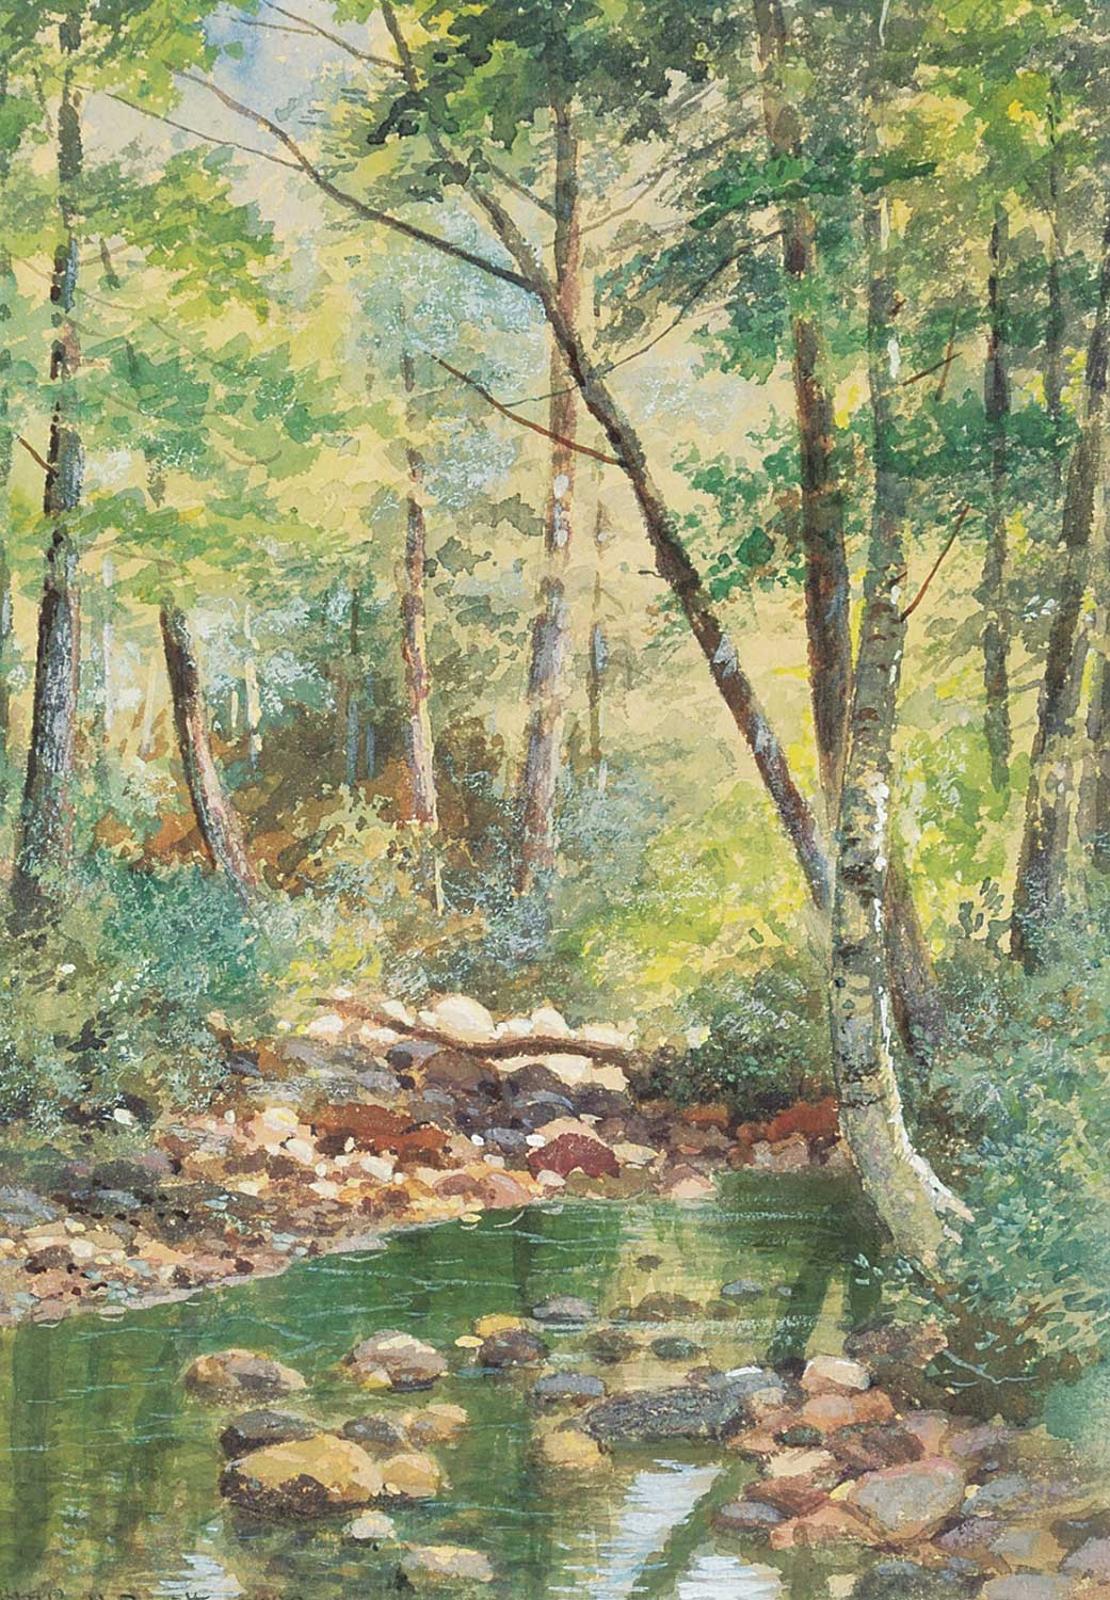 Frederic Martlett Bell-Smith (1846-1923) - In the Woods at North Conway, N.H.